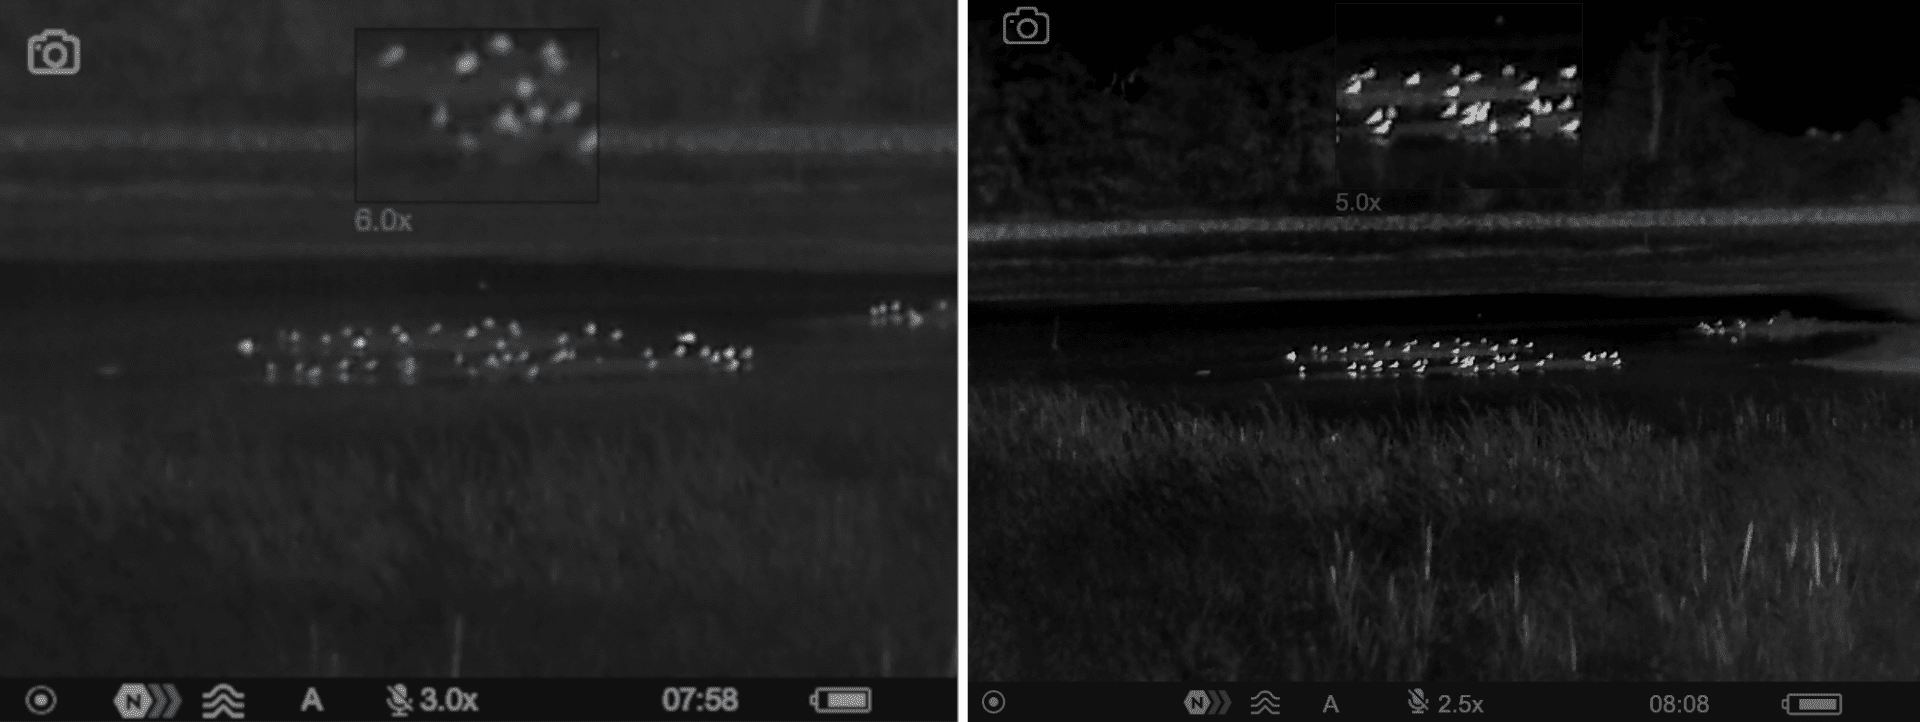 Comparison Image of wading birds on an Axion XM30F and Axion 2 XG35